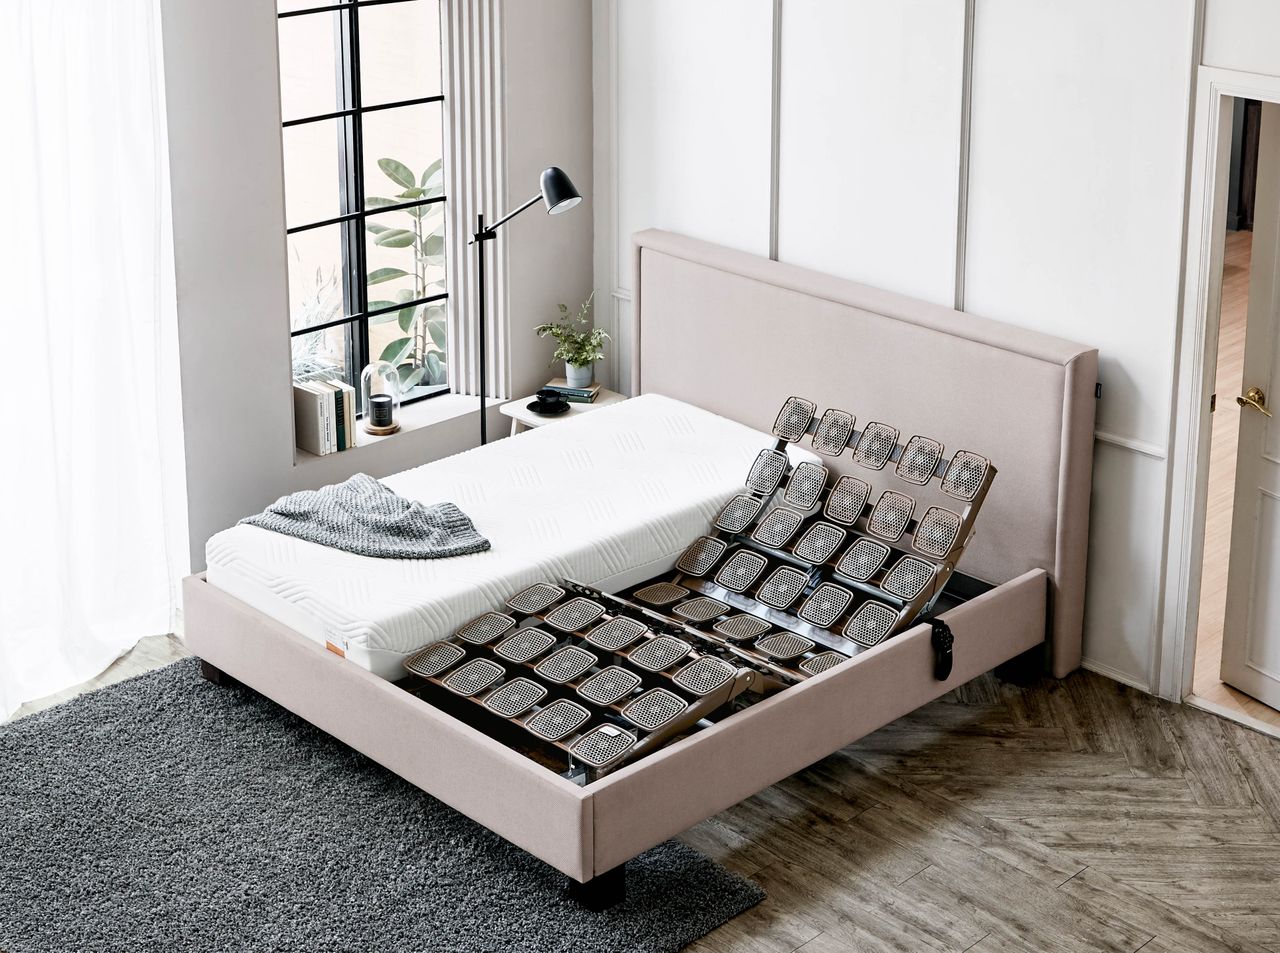 Find the Bed solution Perfect For You